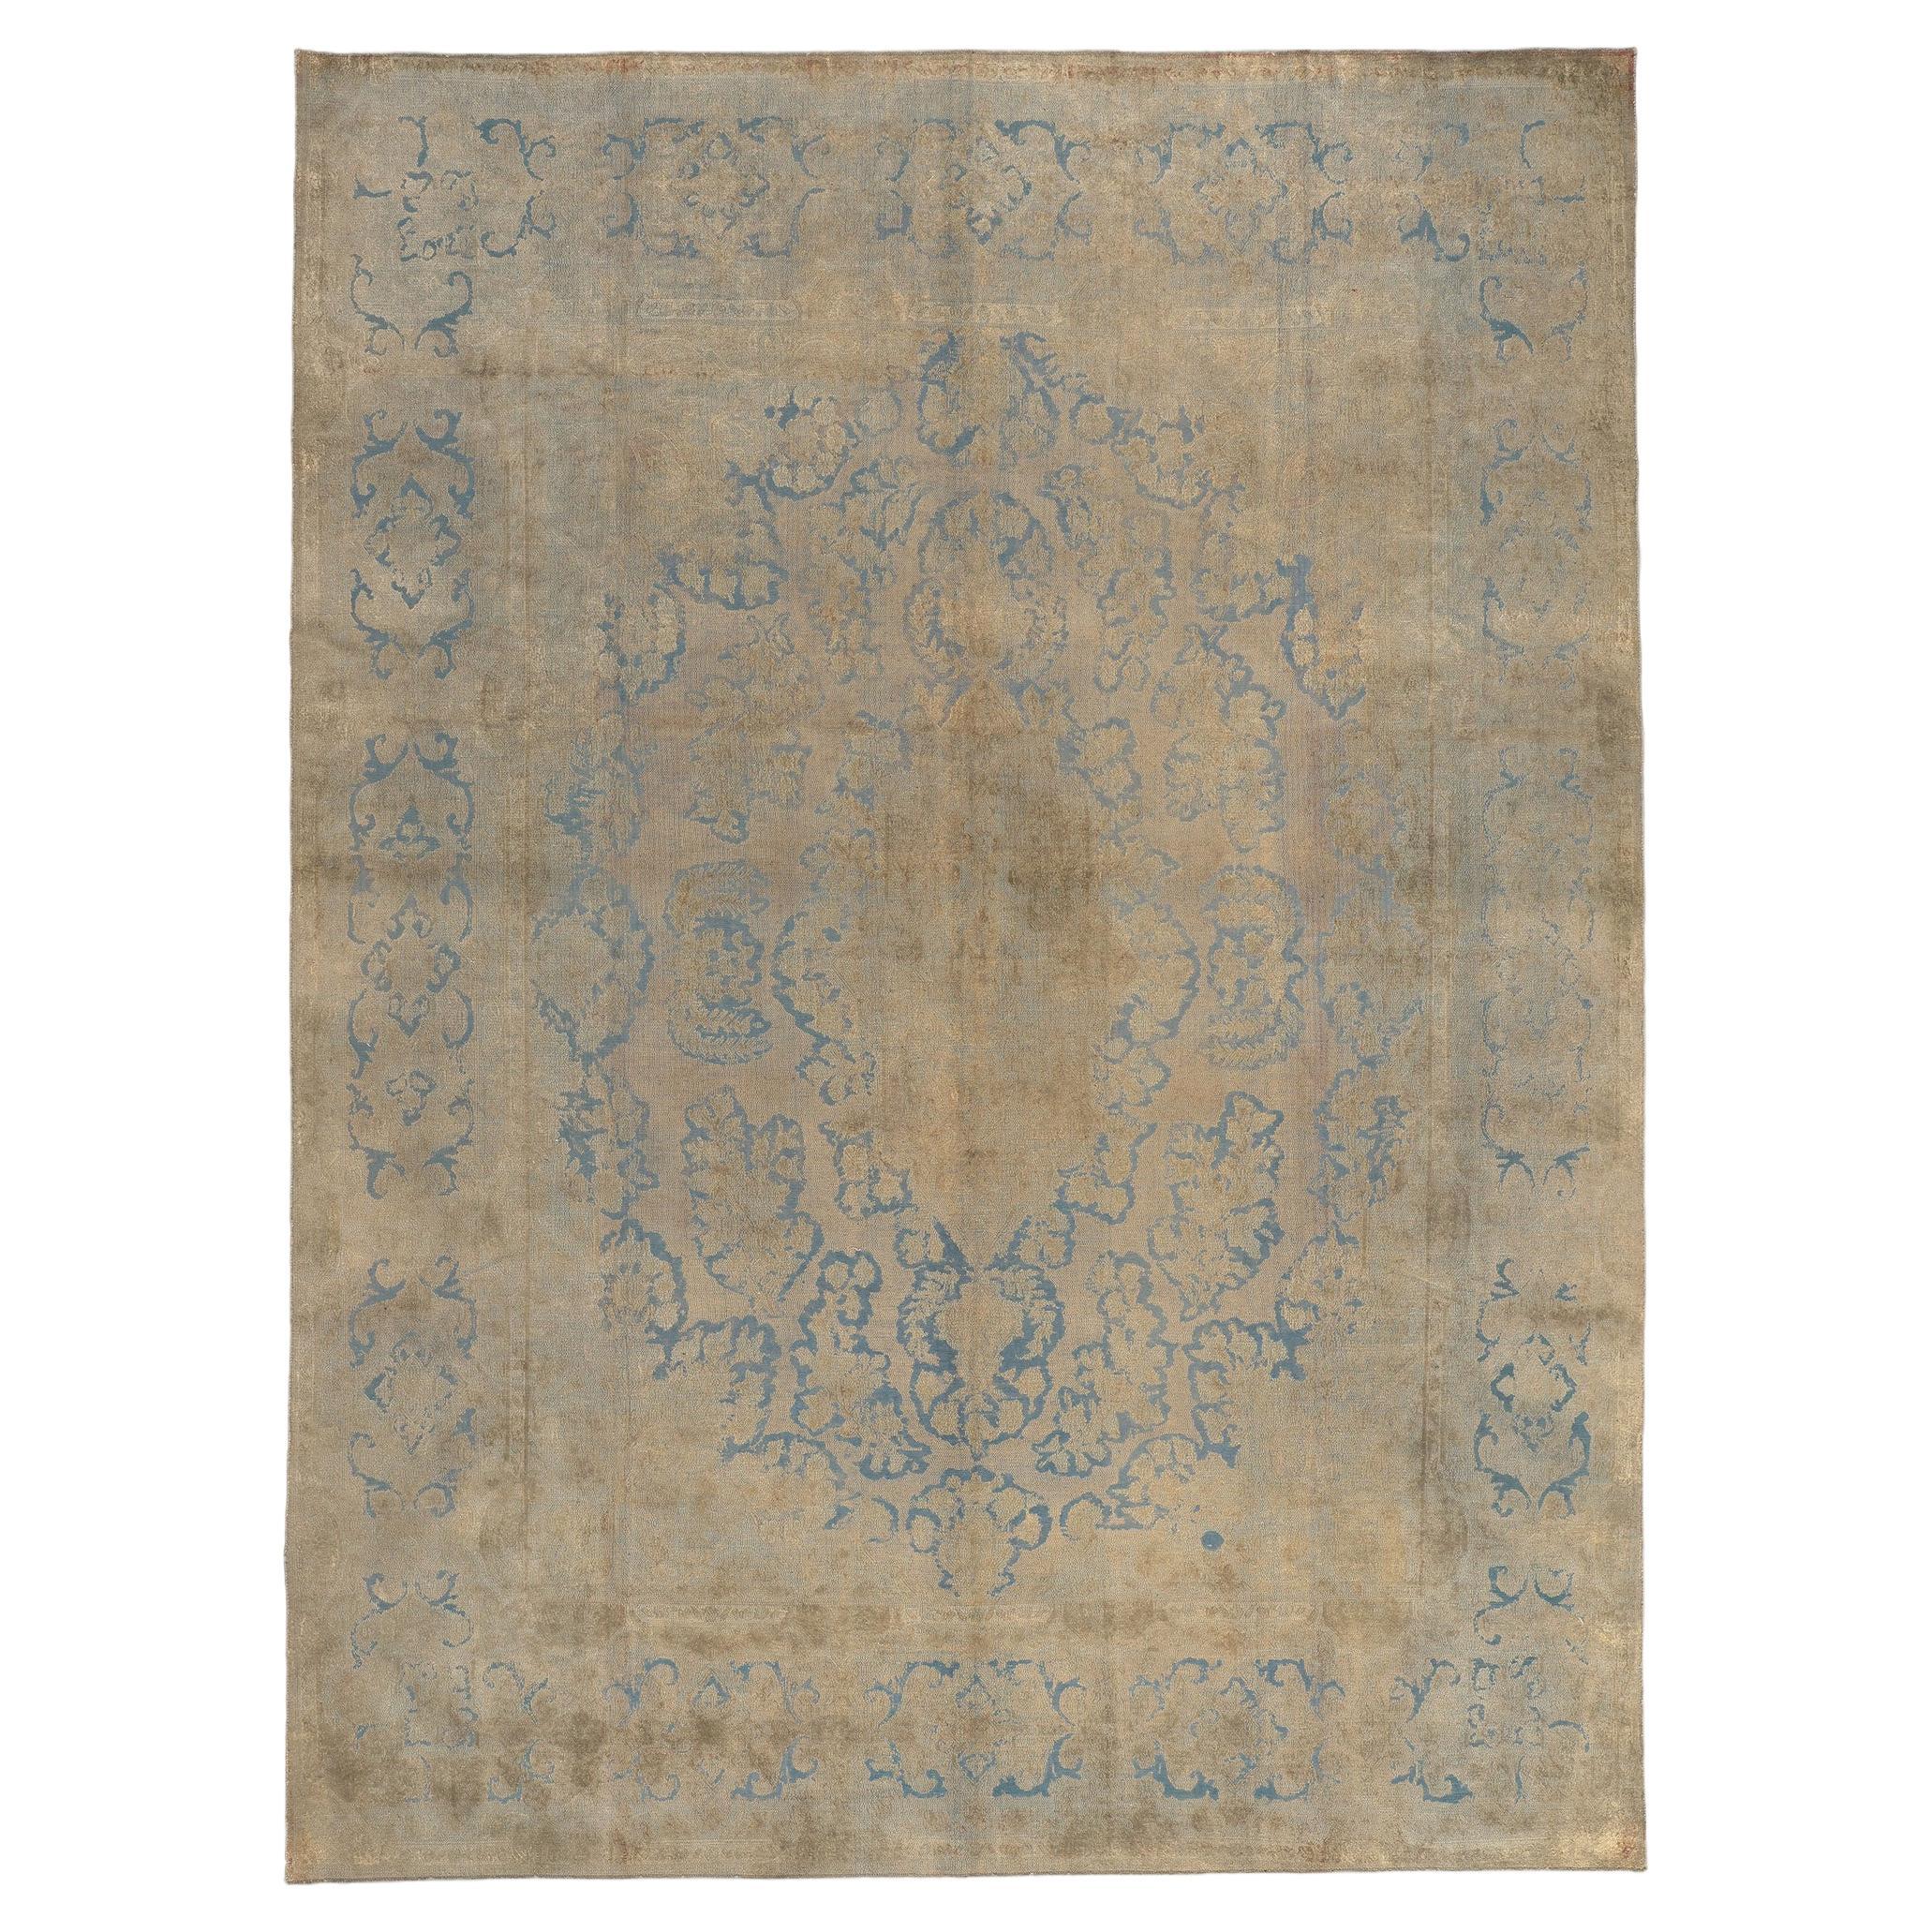 Vintage Turkish Overdyed Rug, Industrial Chic Meets French Country Elegance For Sale